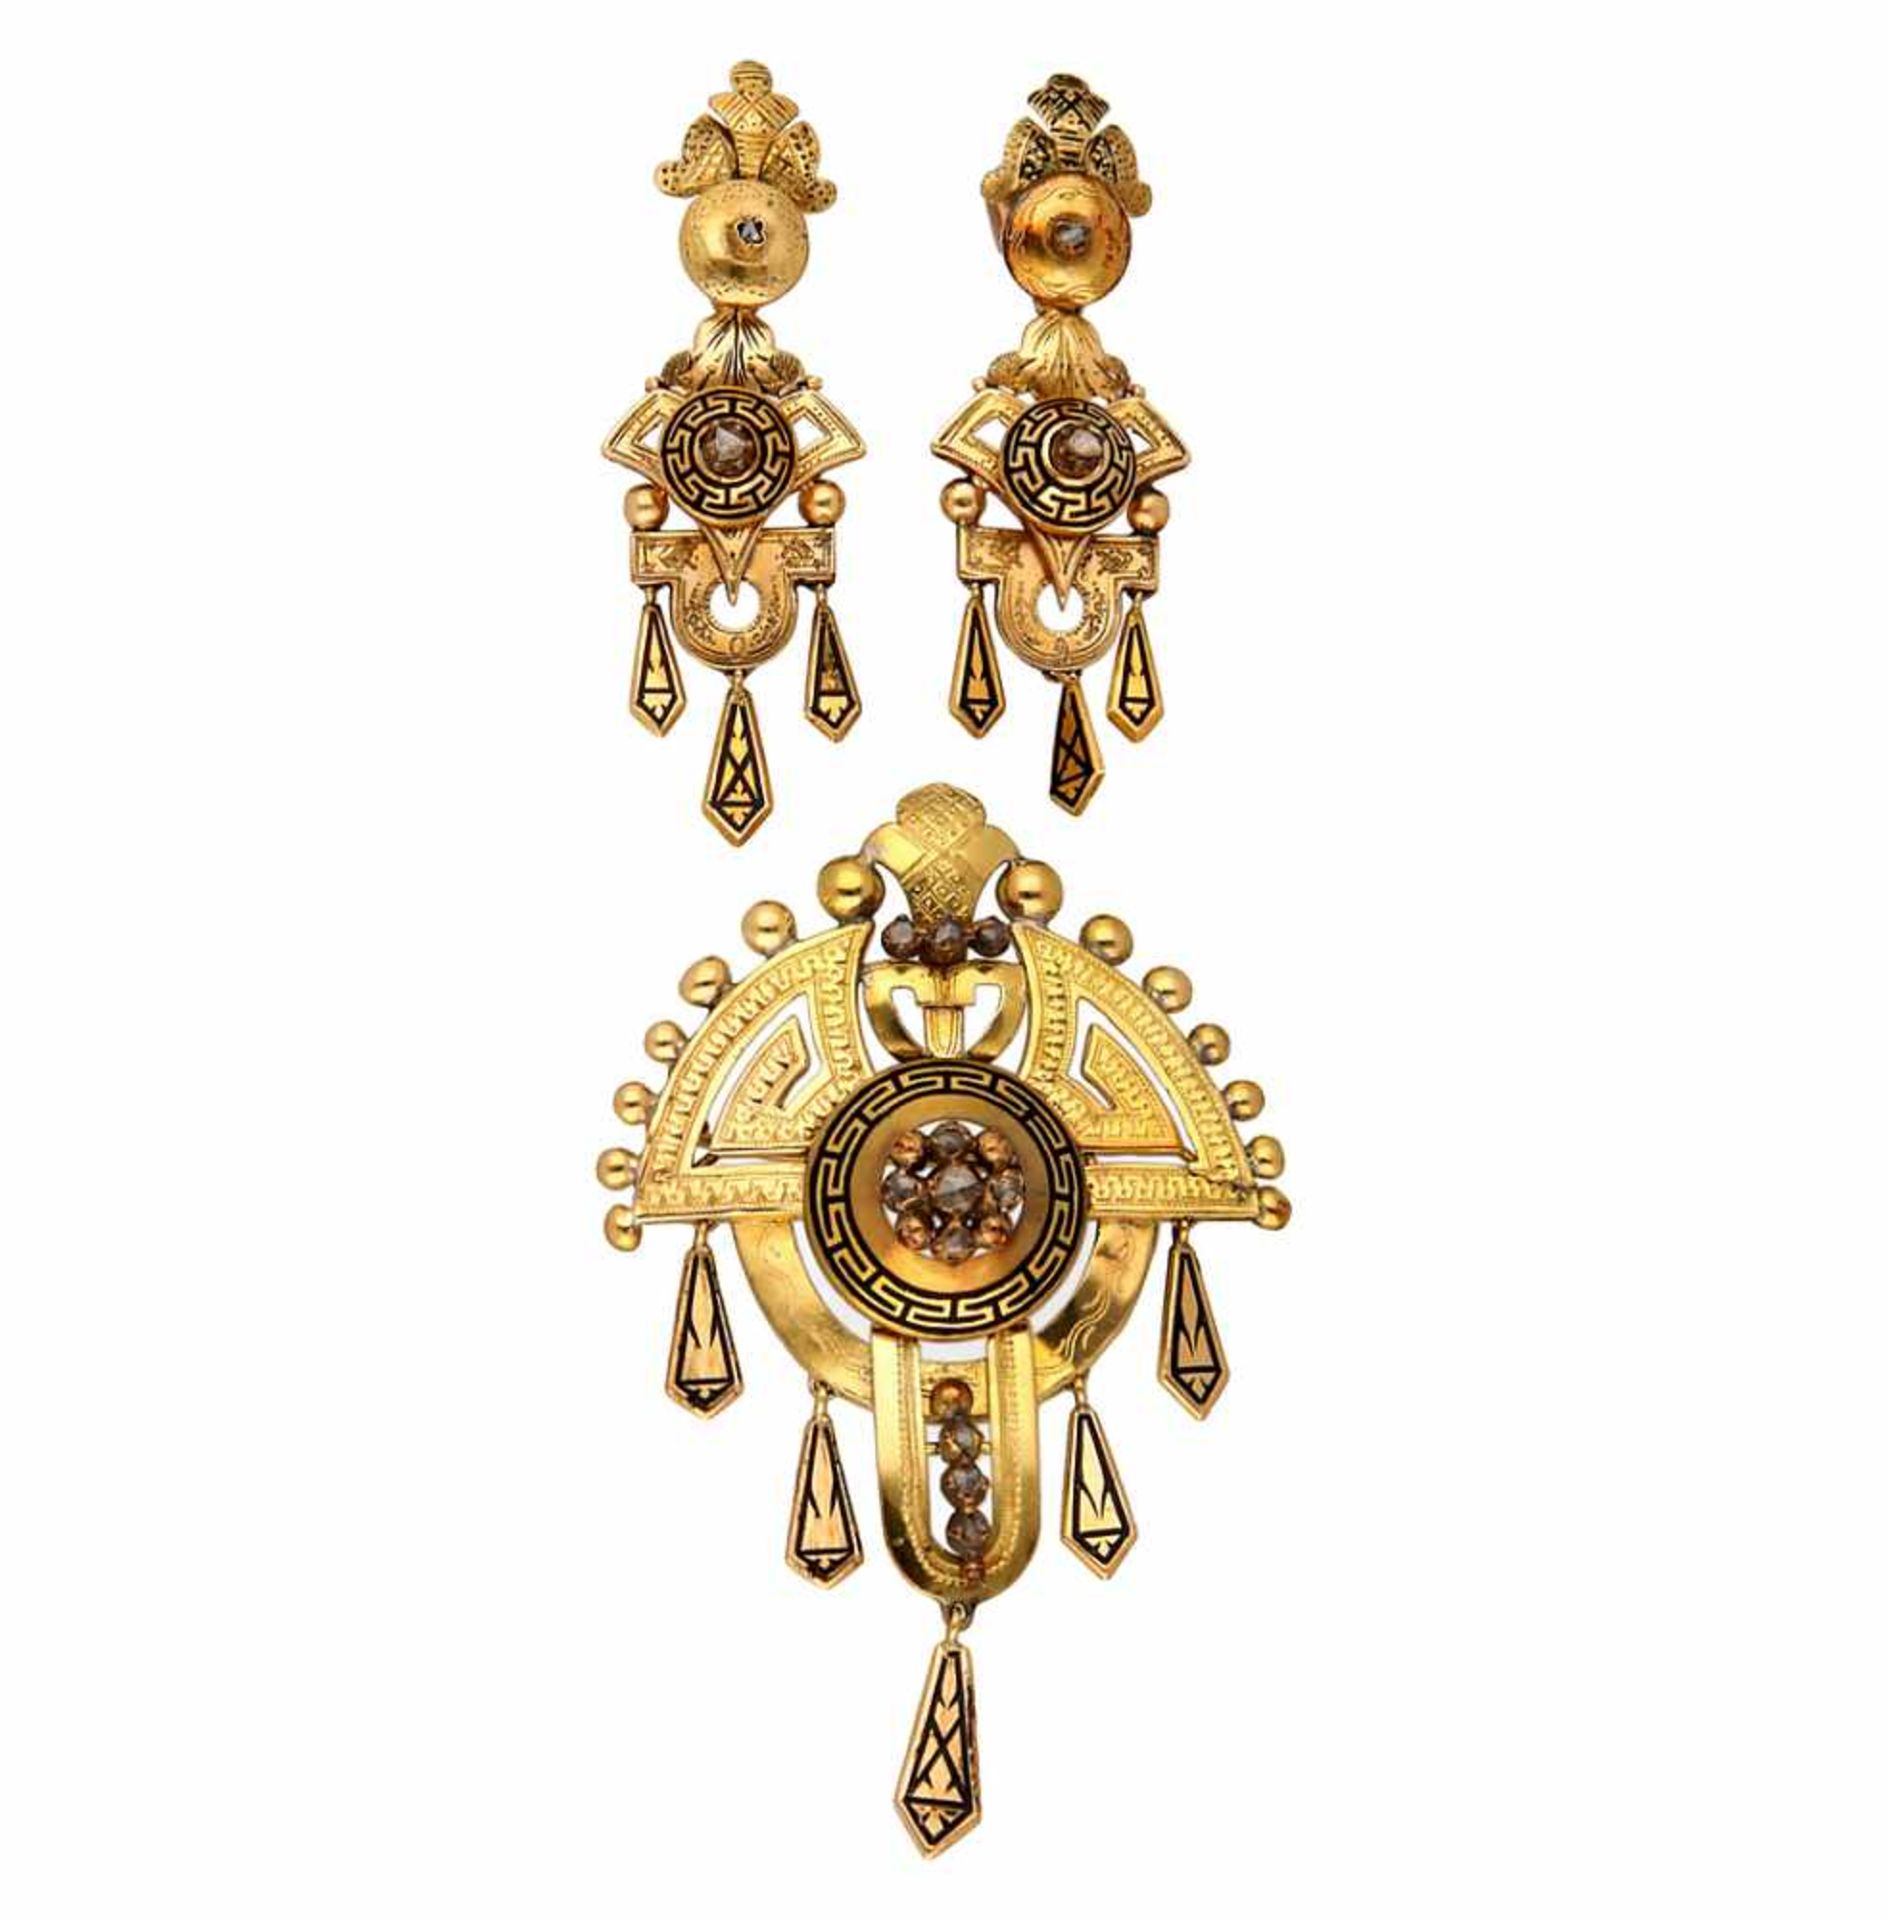 Alphonsine set in gold and enamel, 19th Century.Composed by a brooch and earrings. Gold, enamel